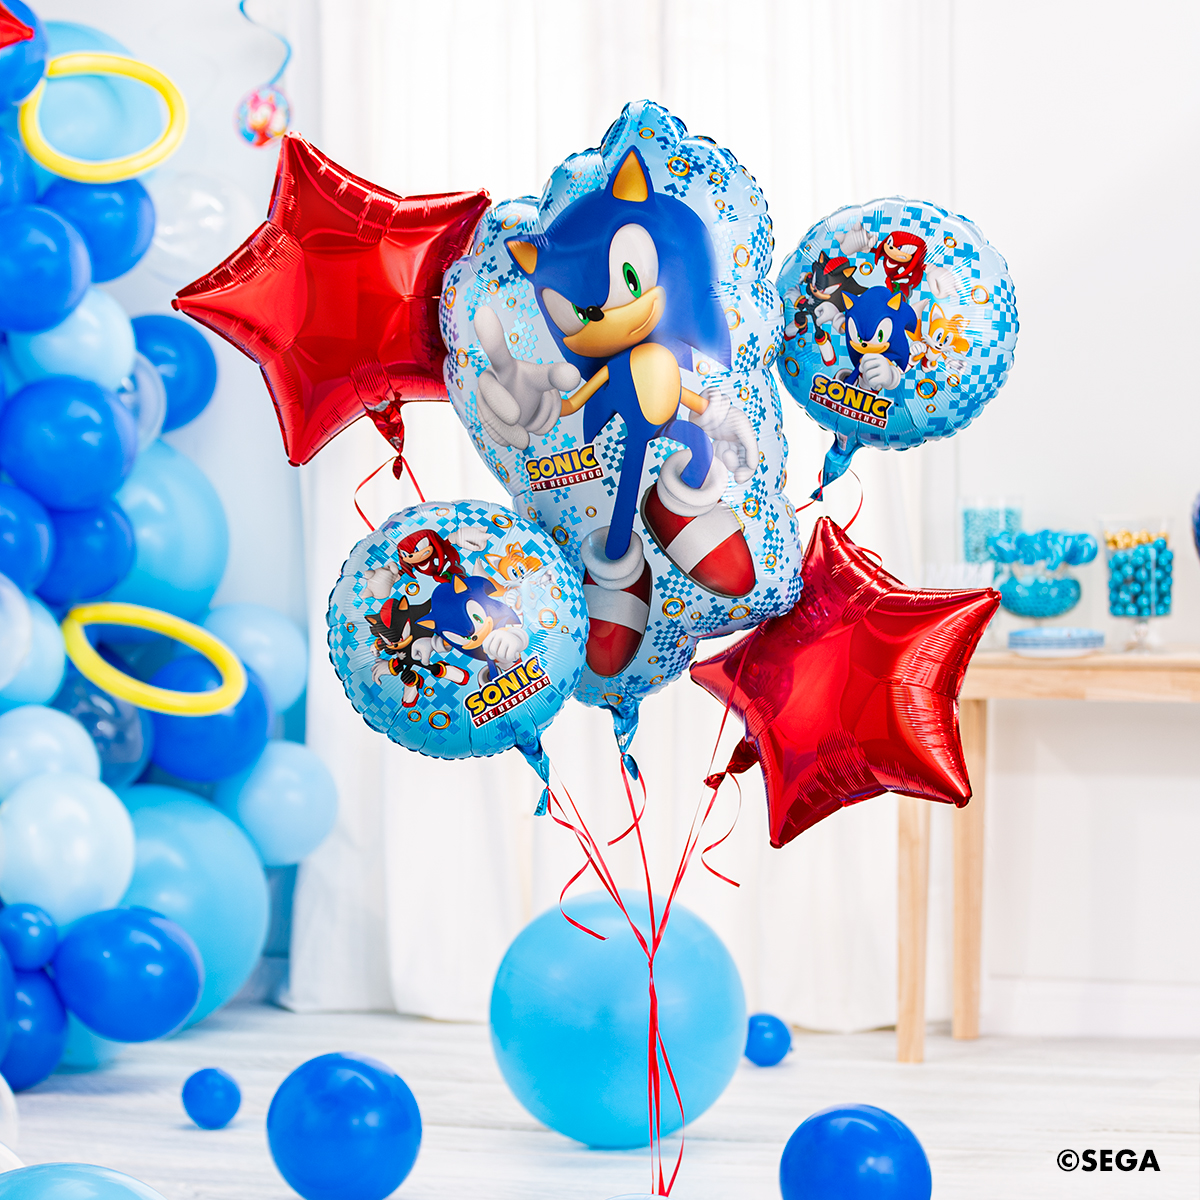 Hedgehogs & Balloons—A Perfect Combo 3 S v 